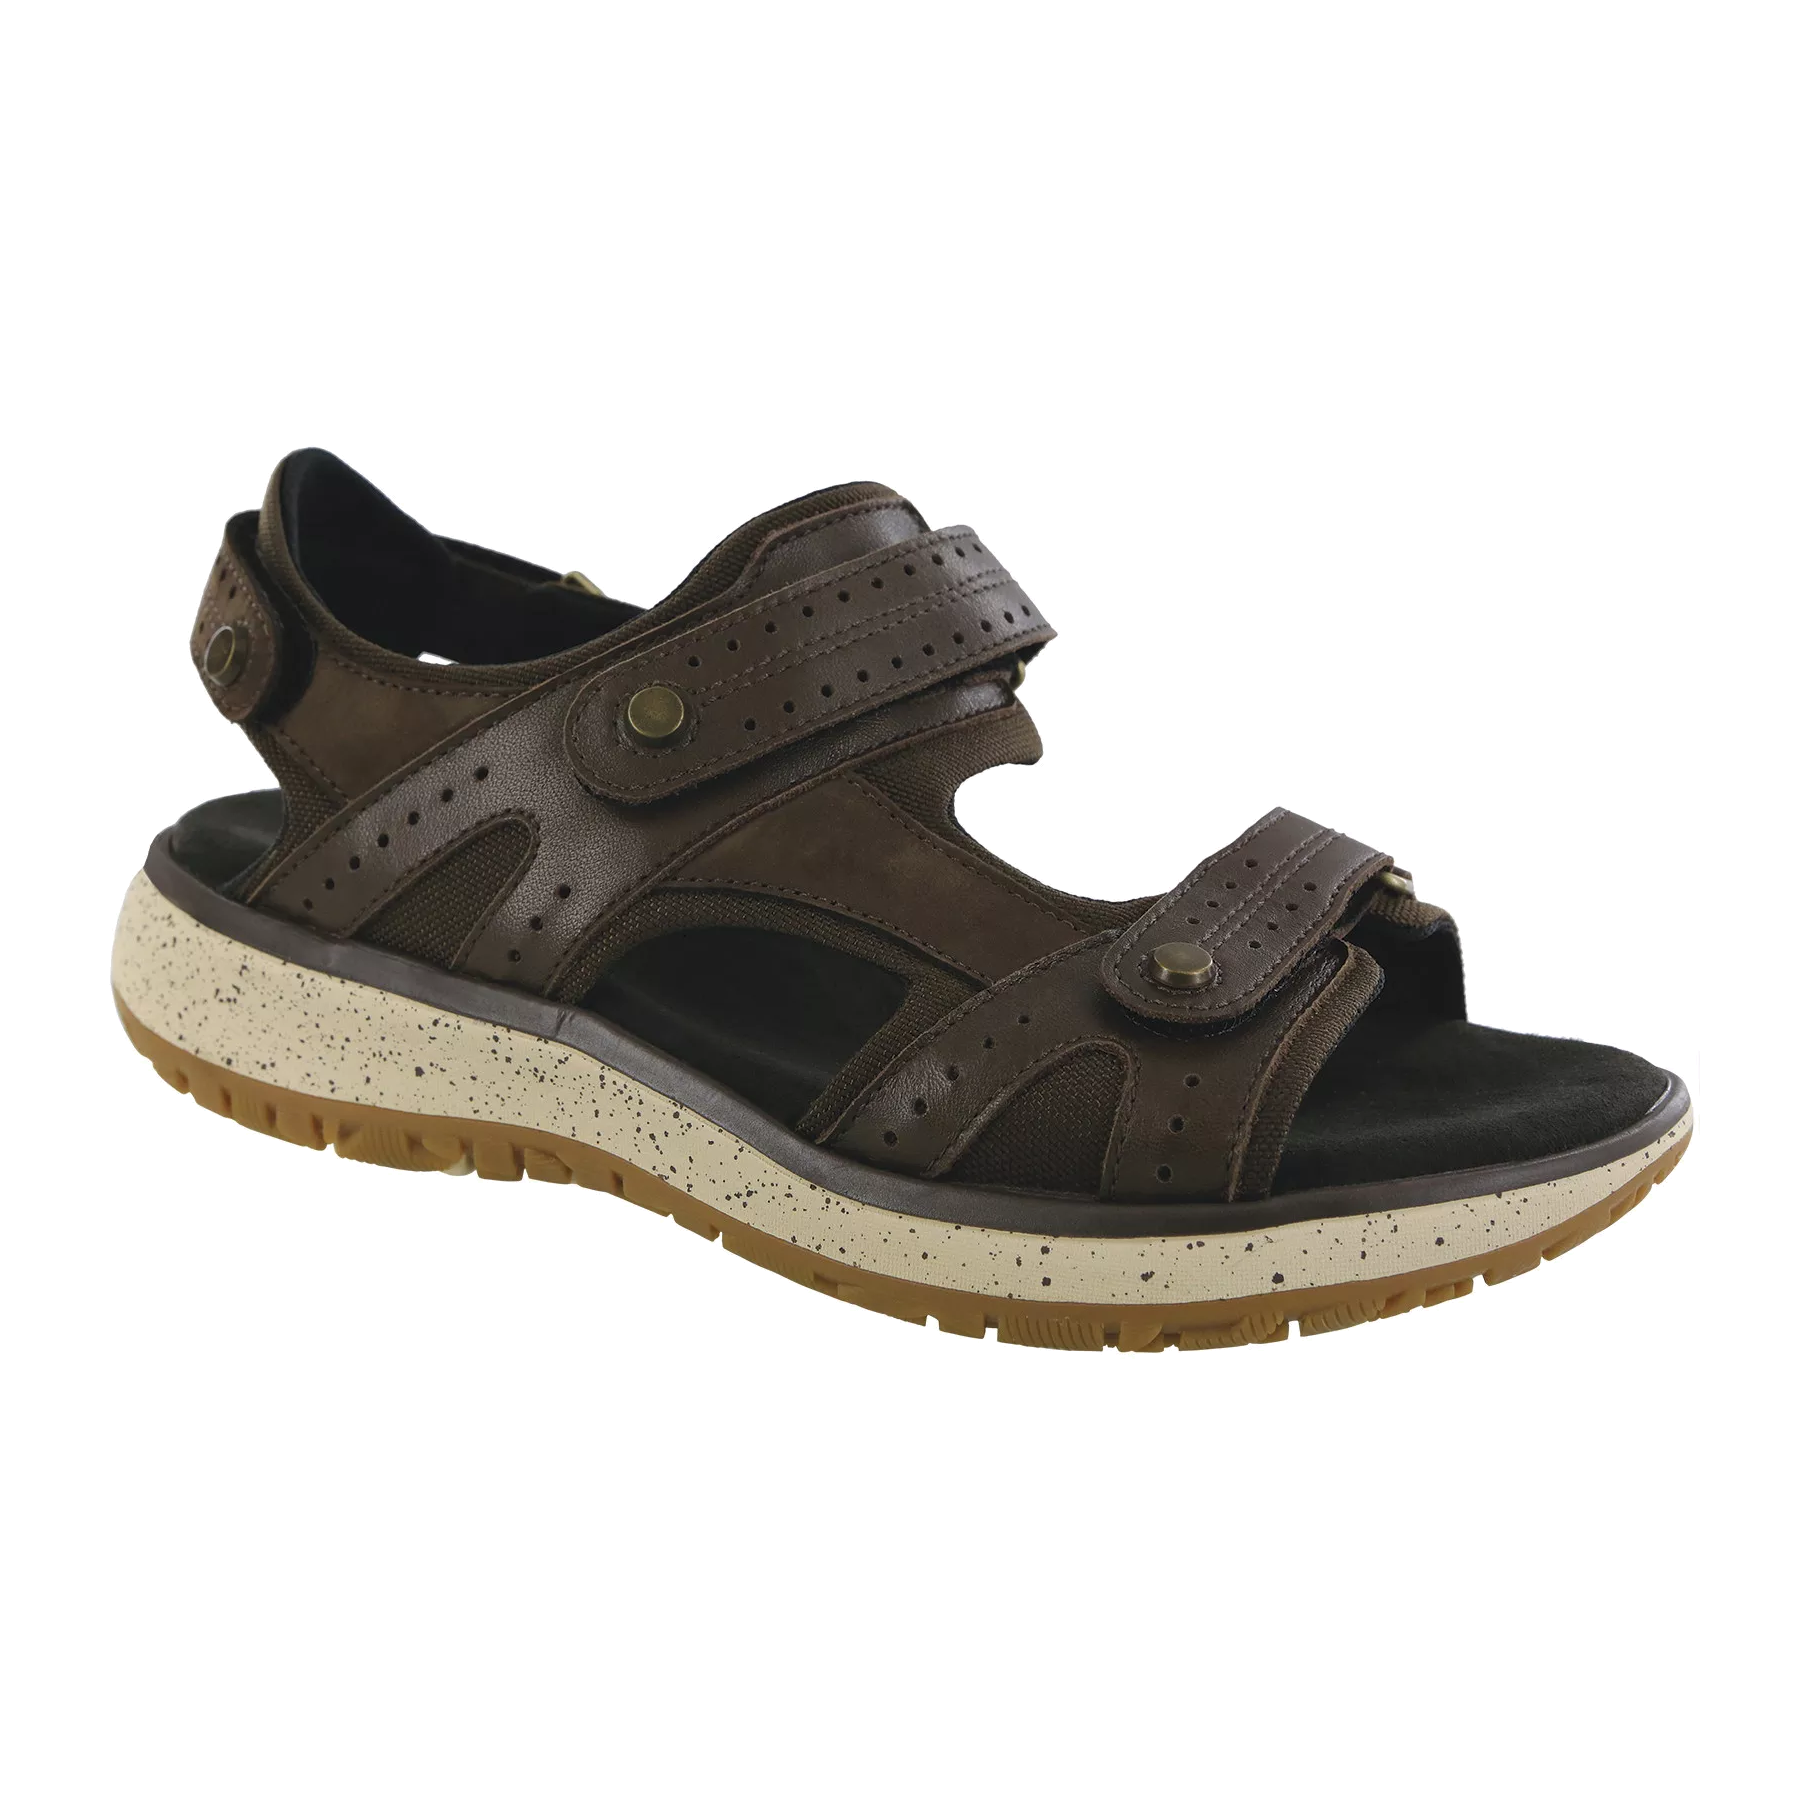 A SAS Embark Smores - Womens sandal with adjustable straps and a cushioned insole, isolated on a white background.